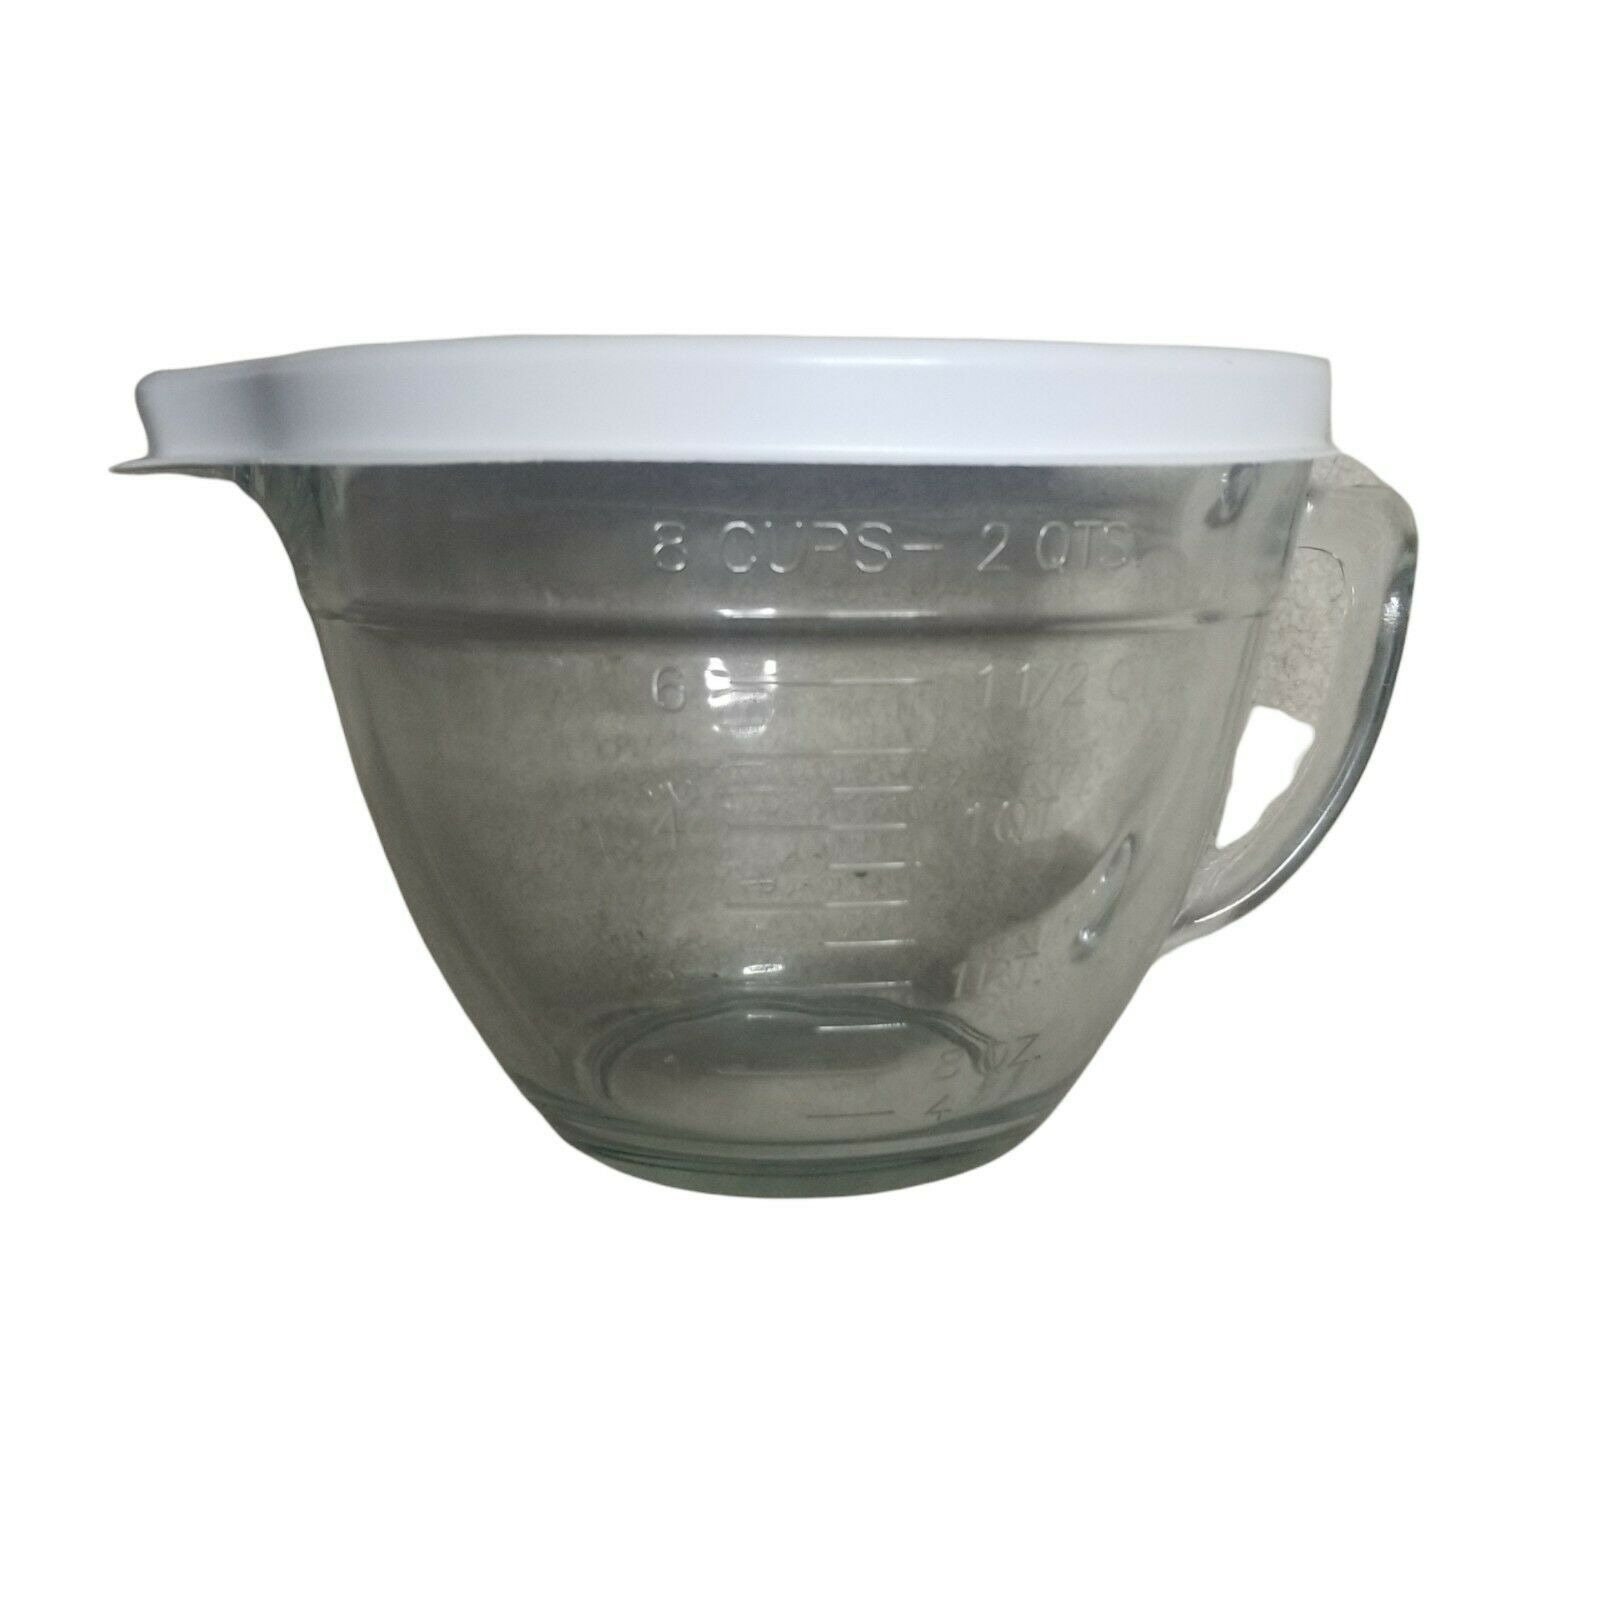 Pampered Chef Sliding Adjustable Measuring Cup White 1/8–1/2 Cup